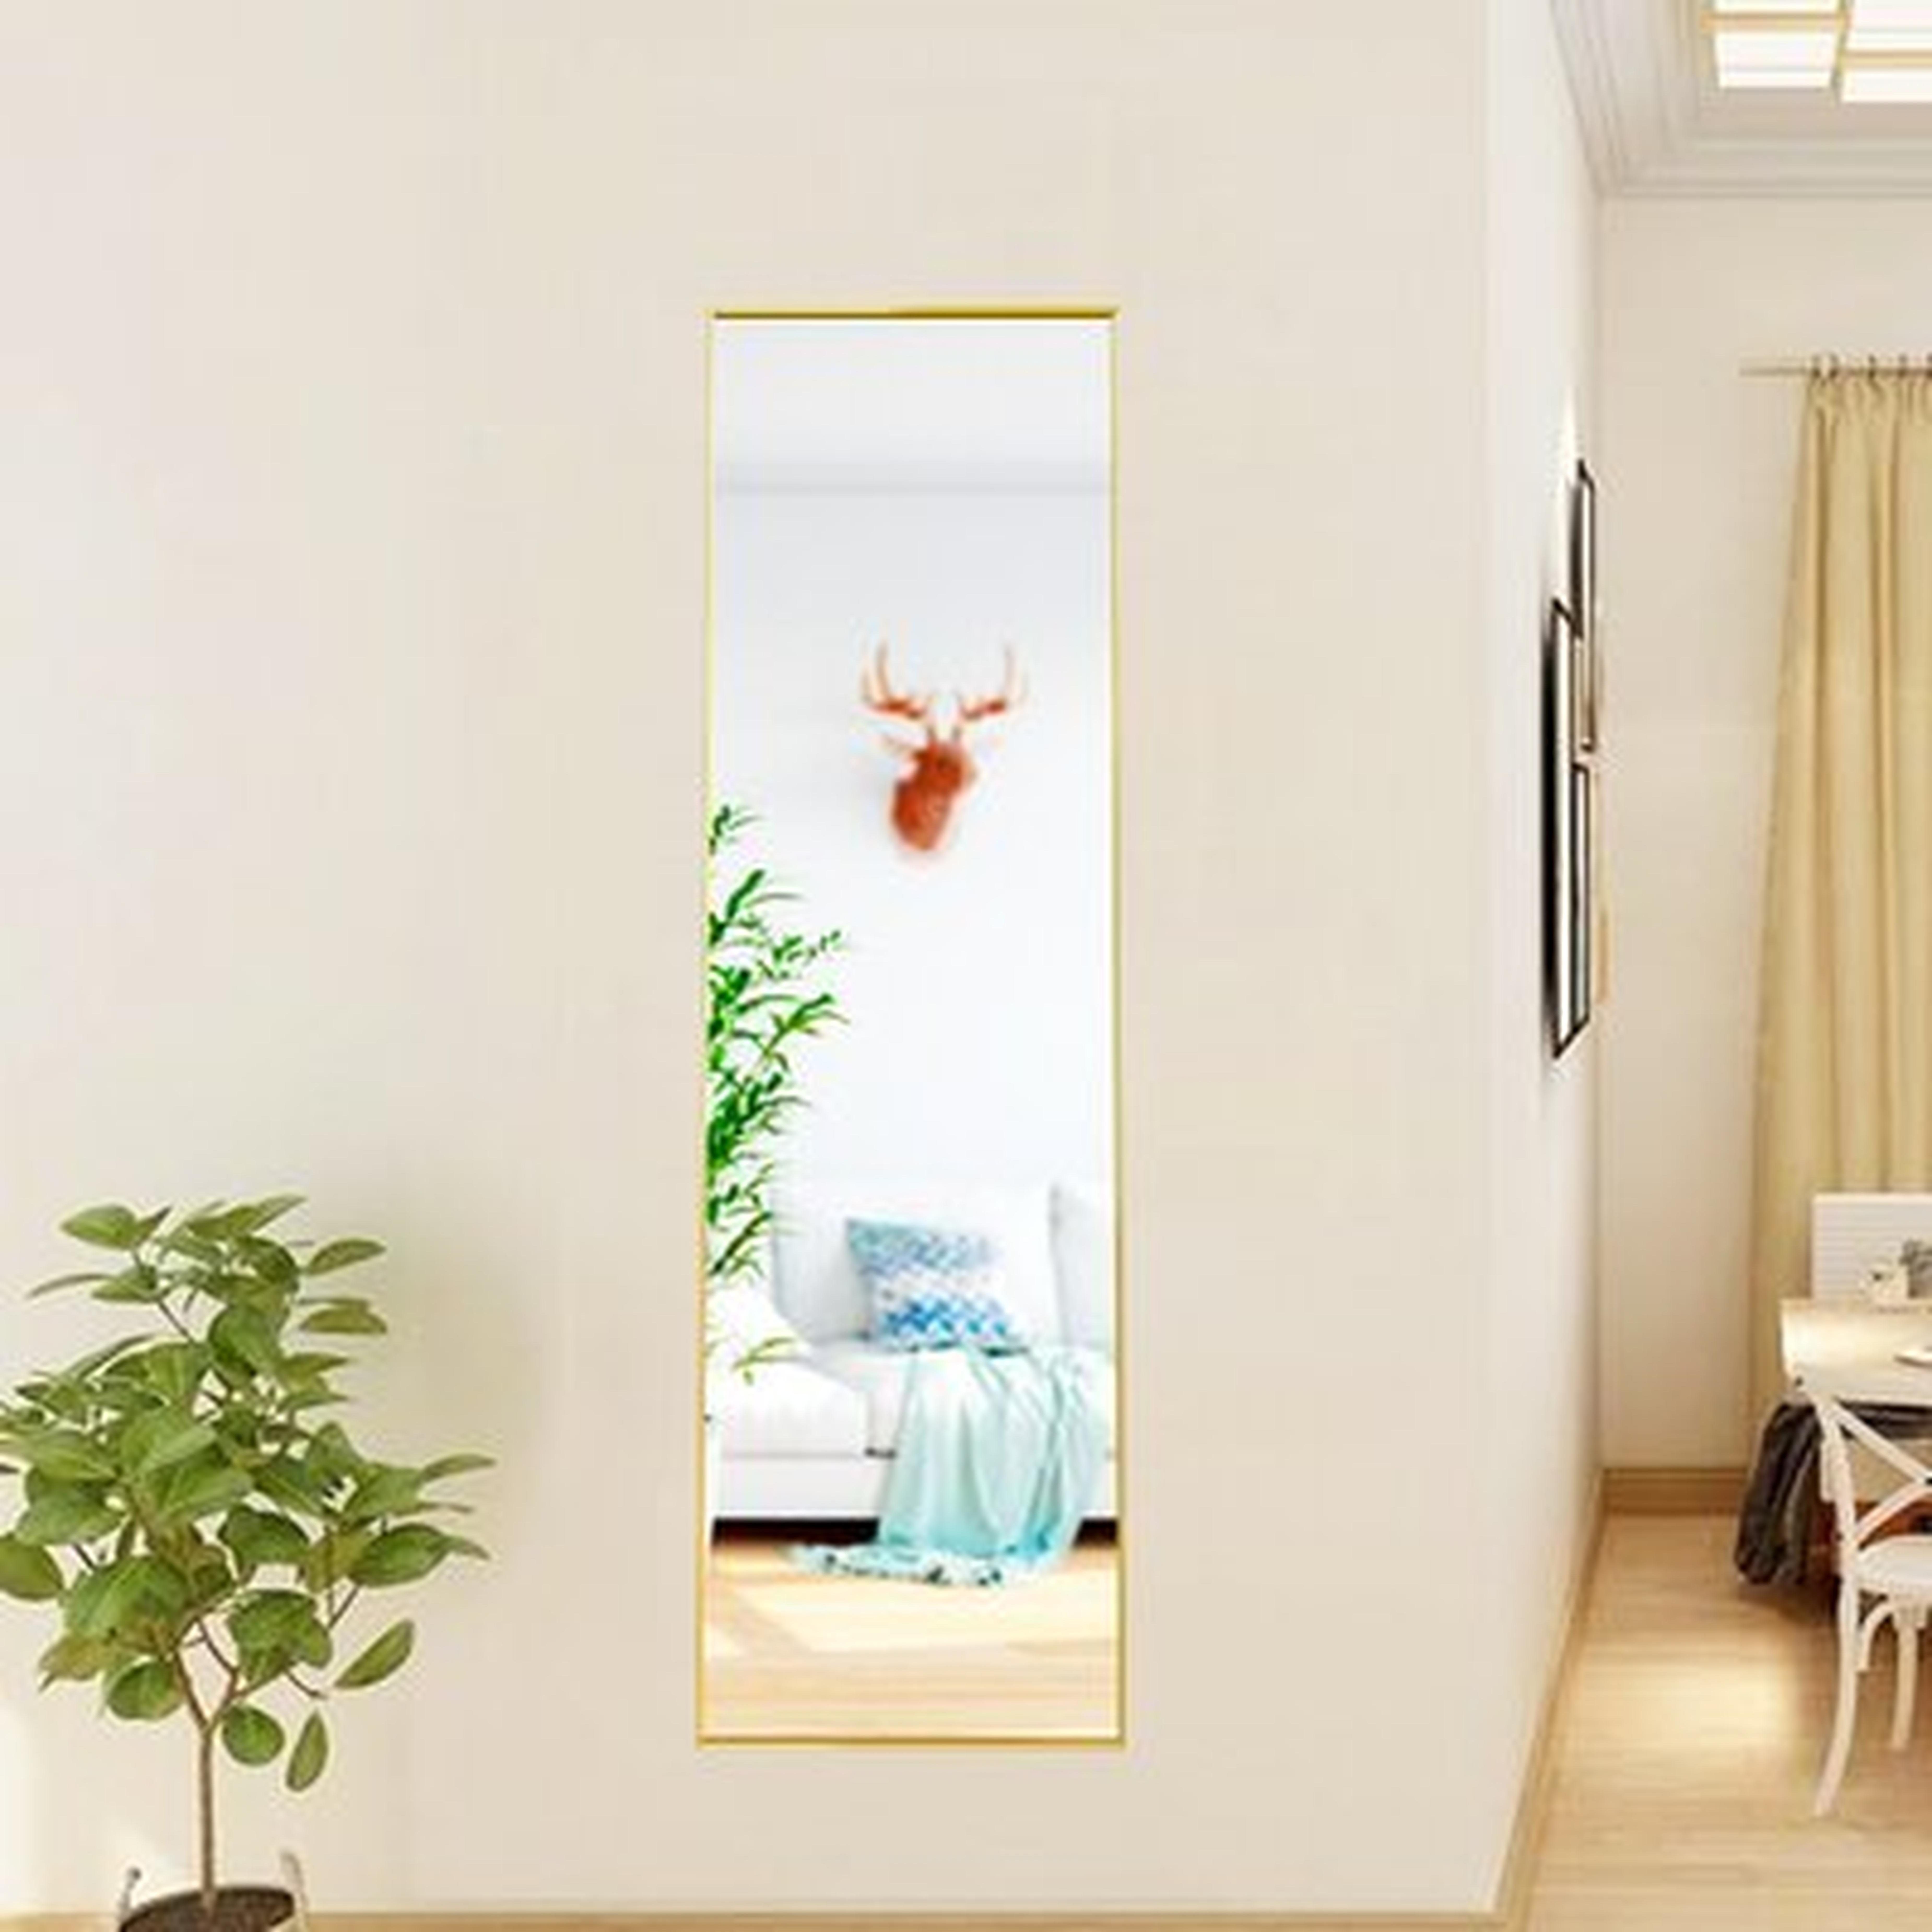 Full Length Mirror Floor Mirror Hanging Standing Or Leaning, Bedroom Mirror Wall-Mounted Mirror With Black Aluminum Alloy Frame - Wayfair